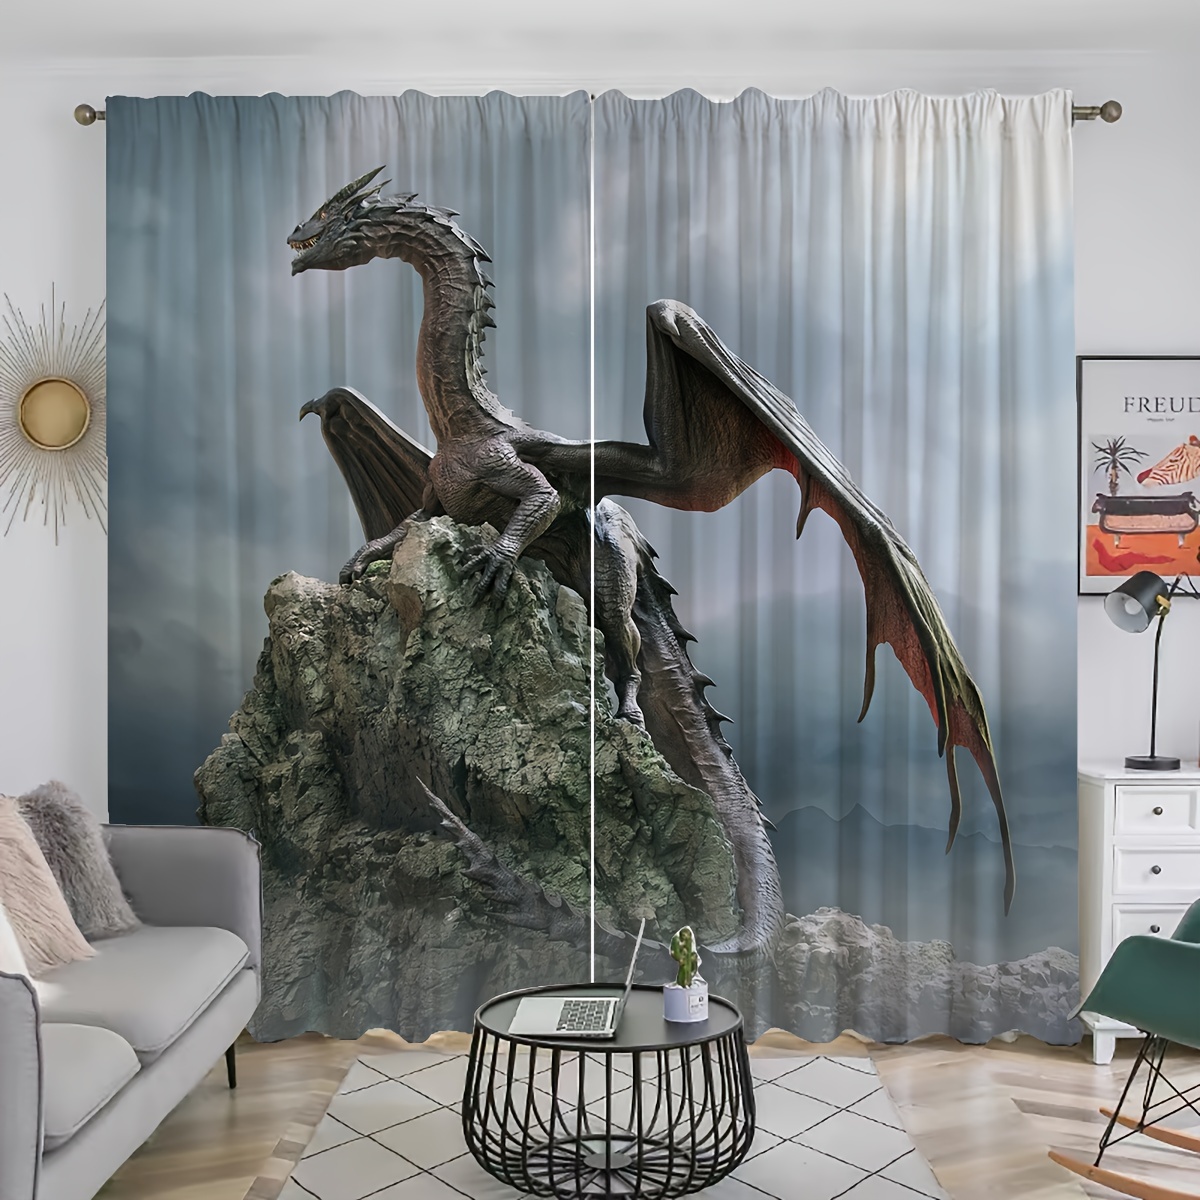 

2pcs, Dragon Curtains Sitting On Rocks, Rod Pocket Curtain, Suitable For Restaurants, Public Places, Living Rooms, Bedrooms, Offices, Study Rooms, Home Decoration